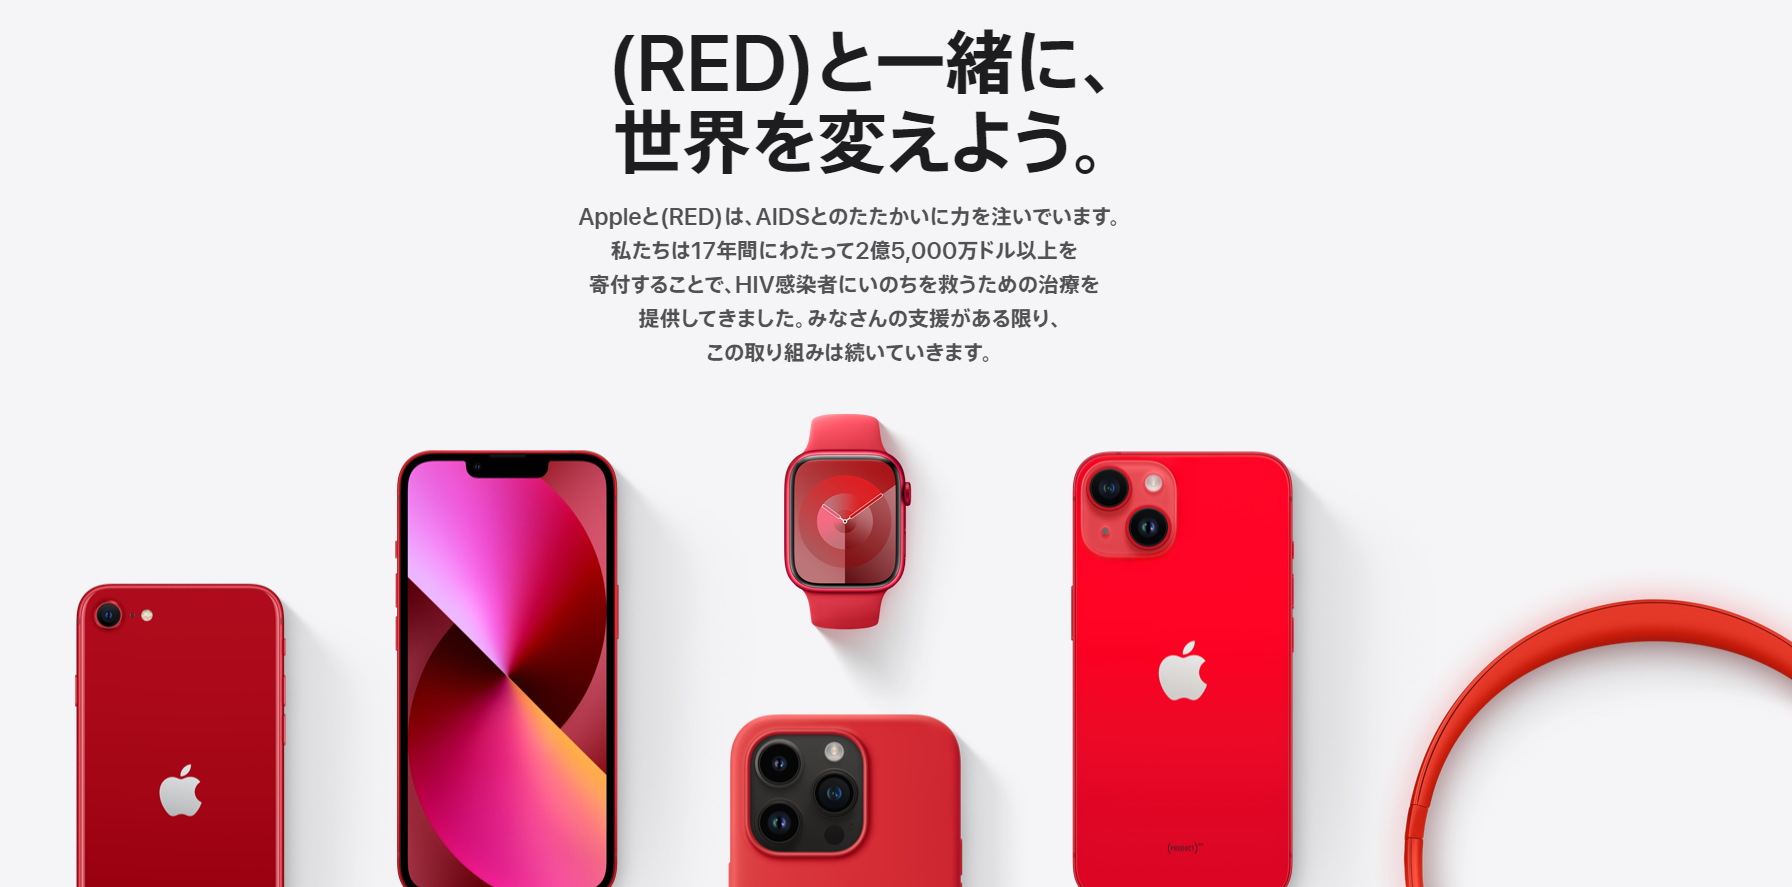 iPhoneの(PRODUCT)REDとは・・・